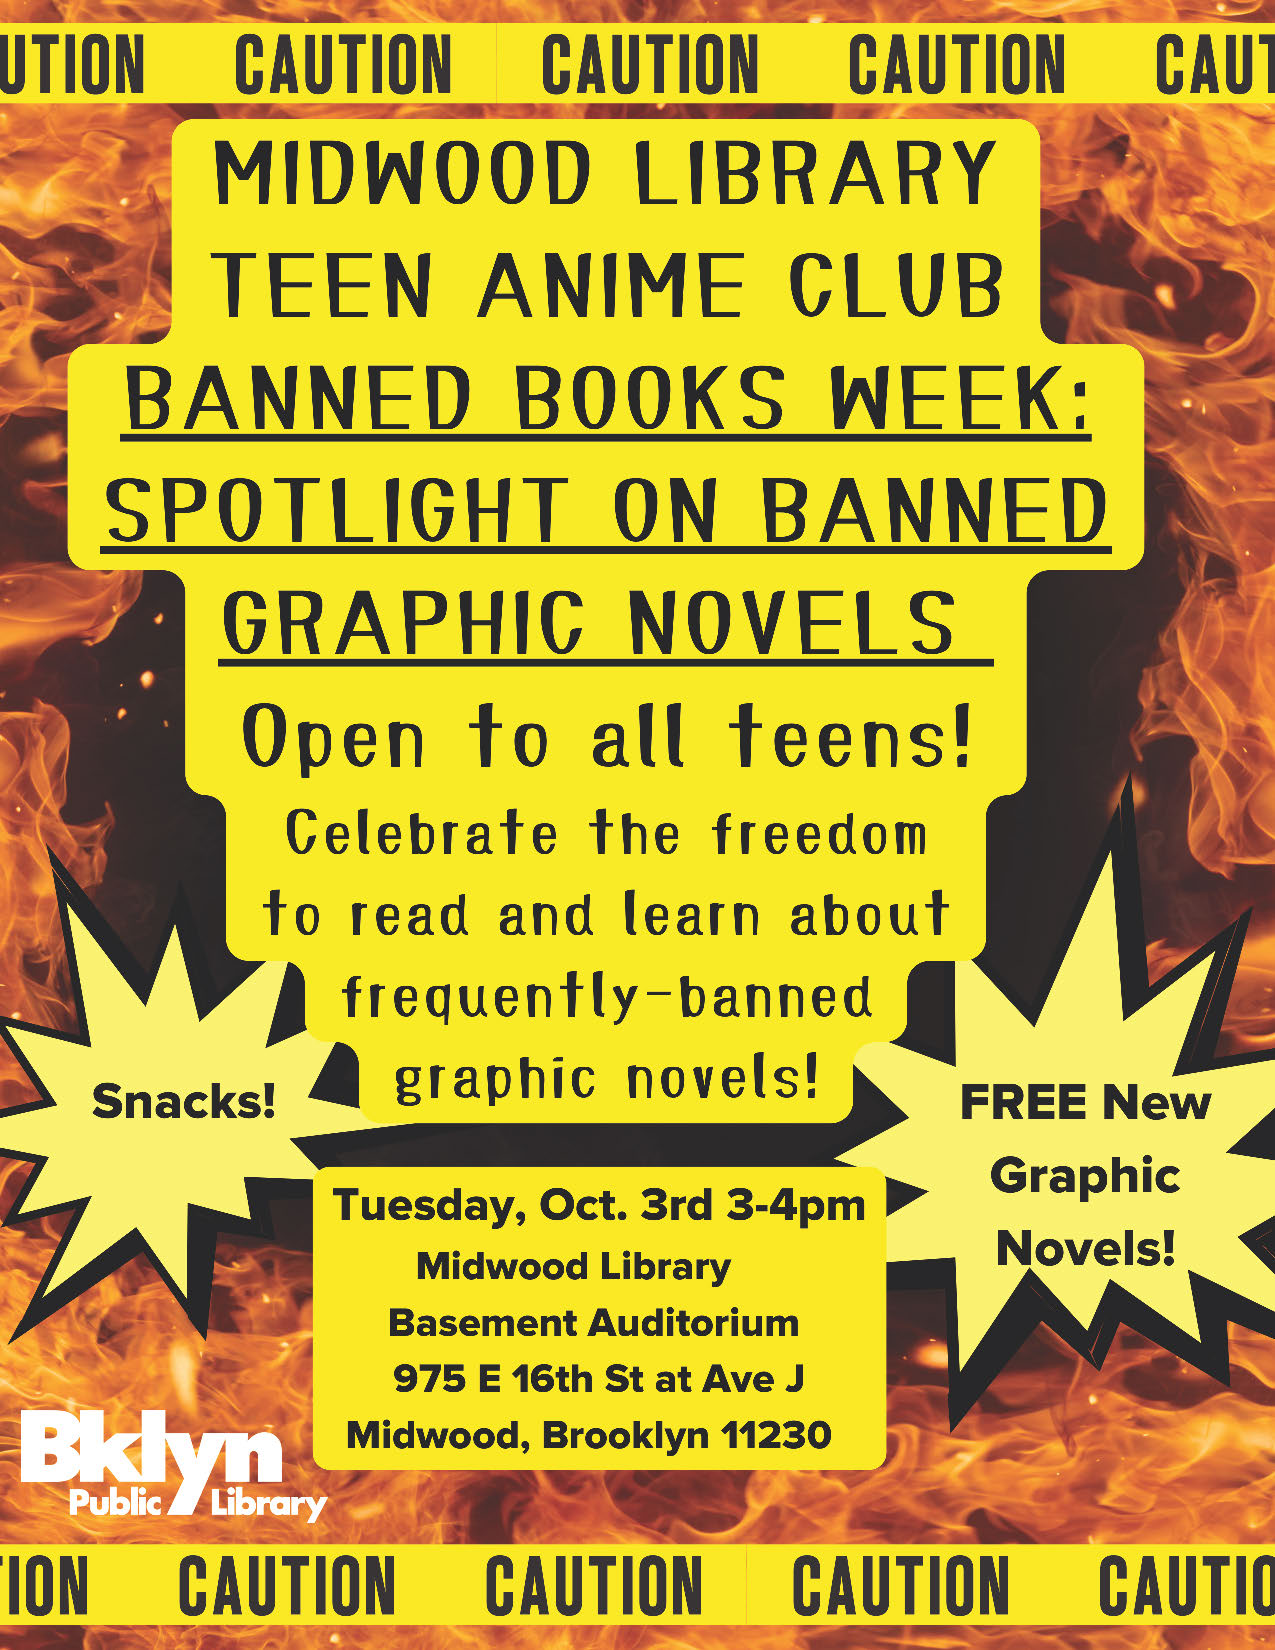 2023-MIDWOOD LIBRARY BANNED BOOKS WEEK SPOTLIGHT ON BANNED GRAPHIC NOVELS